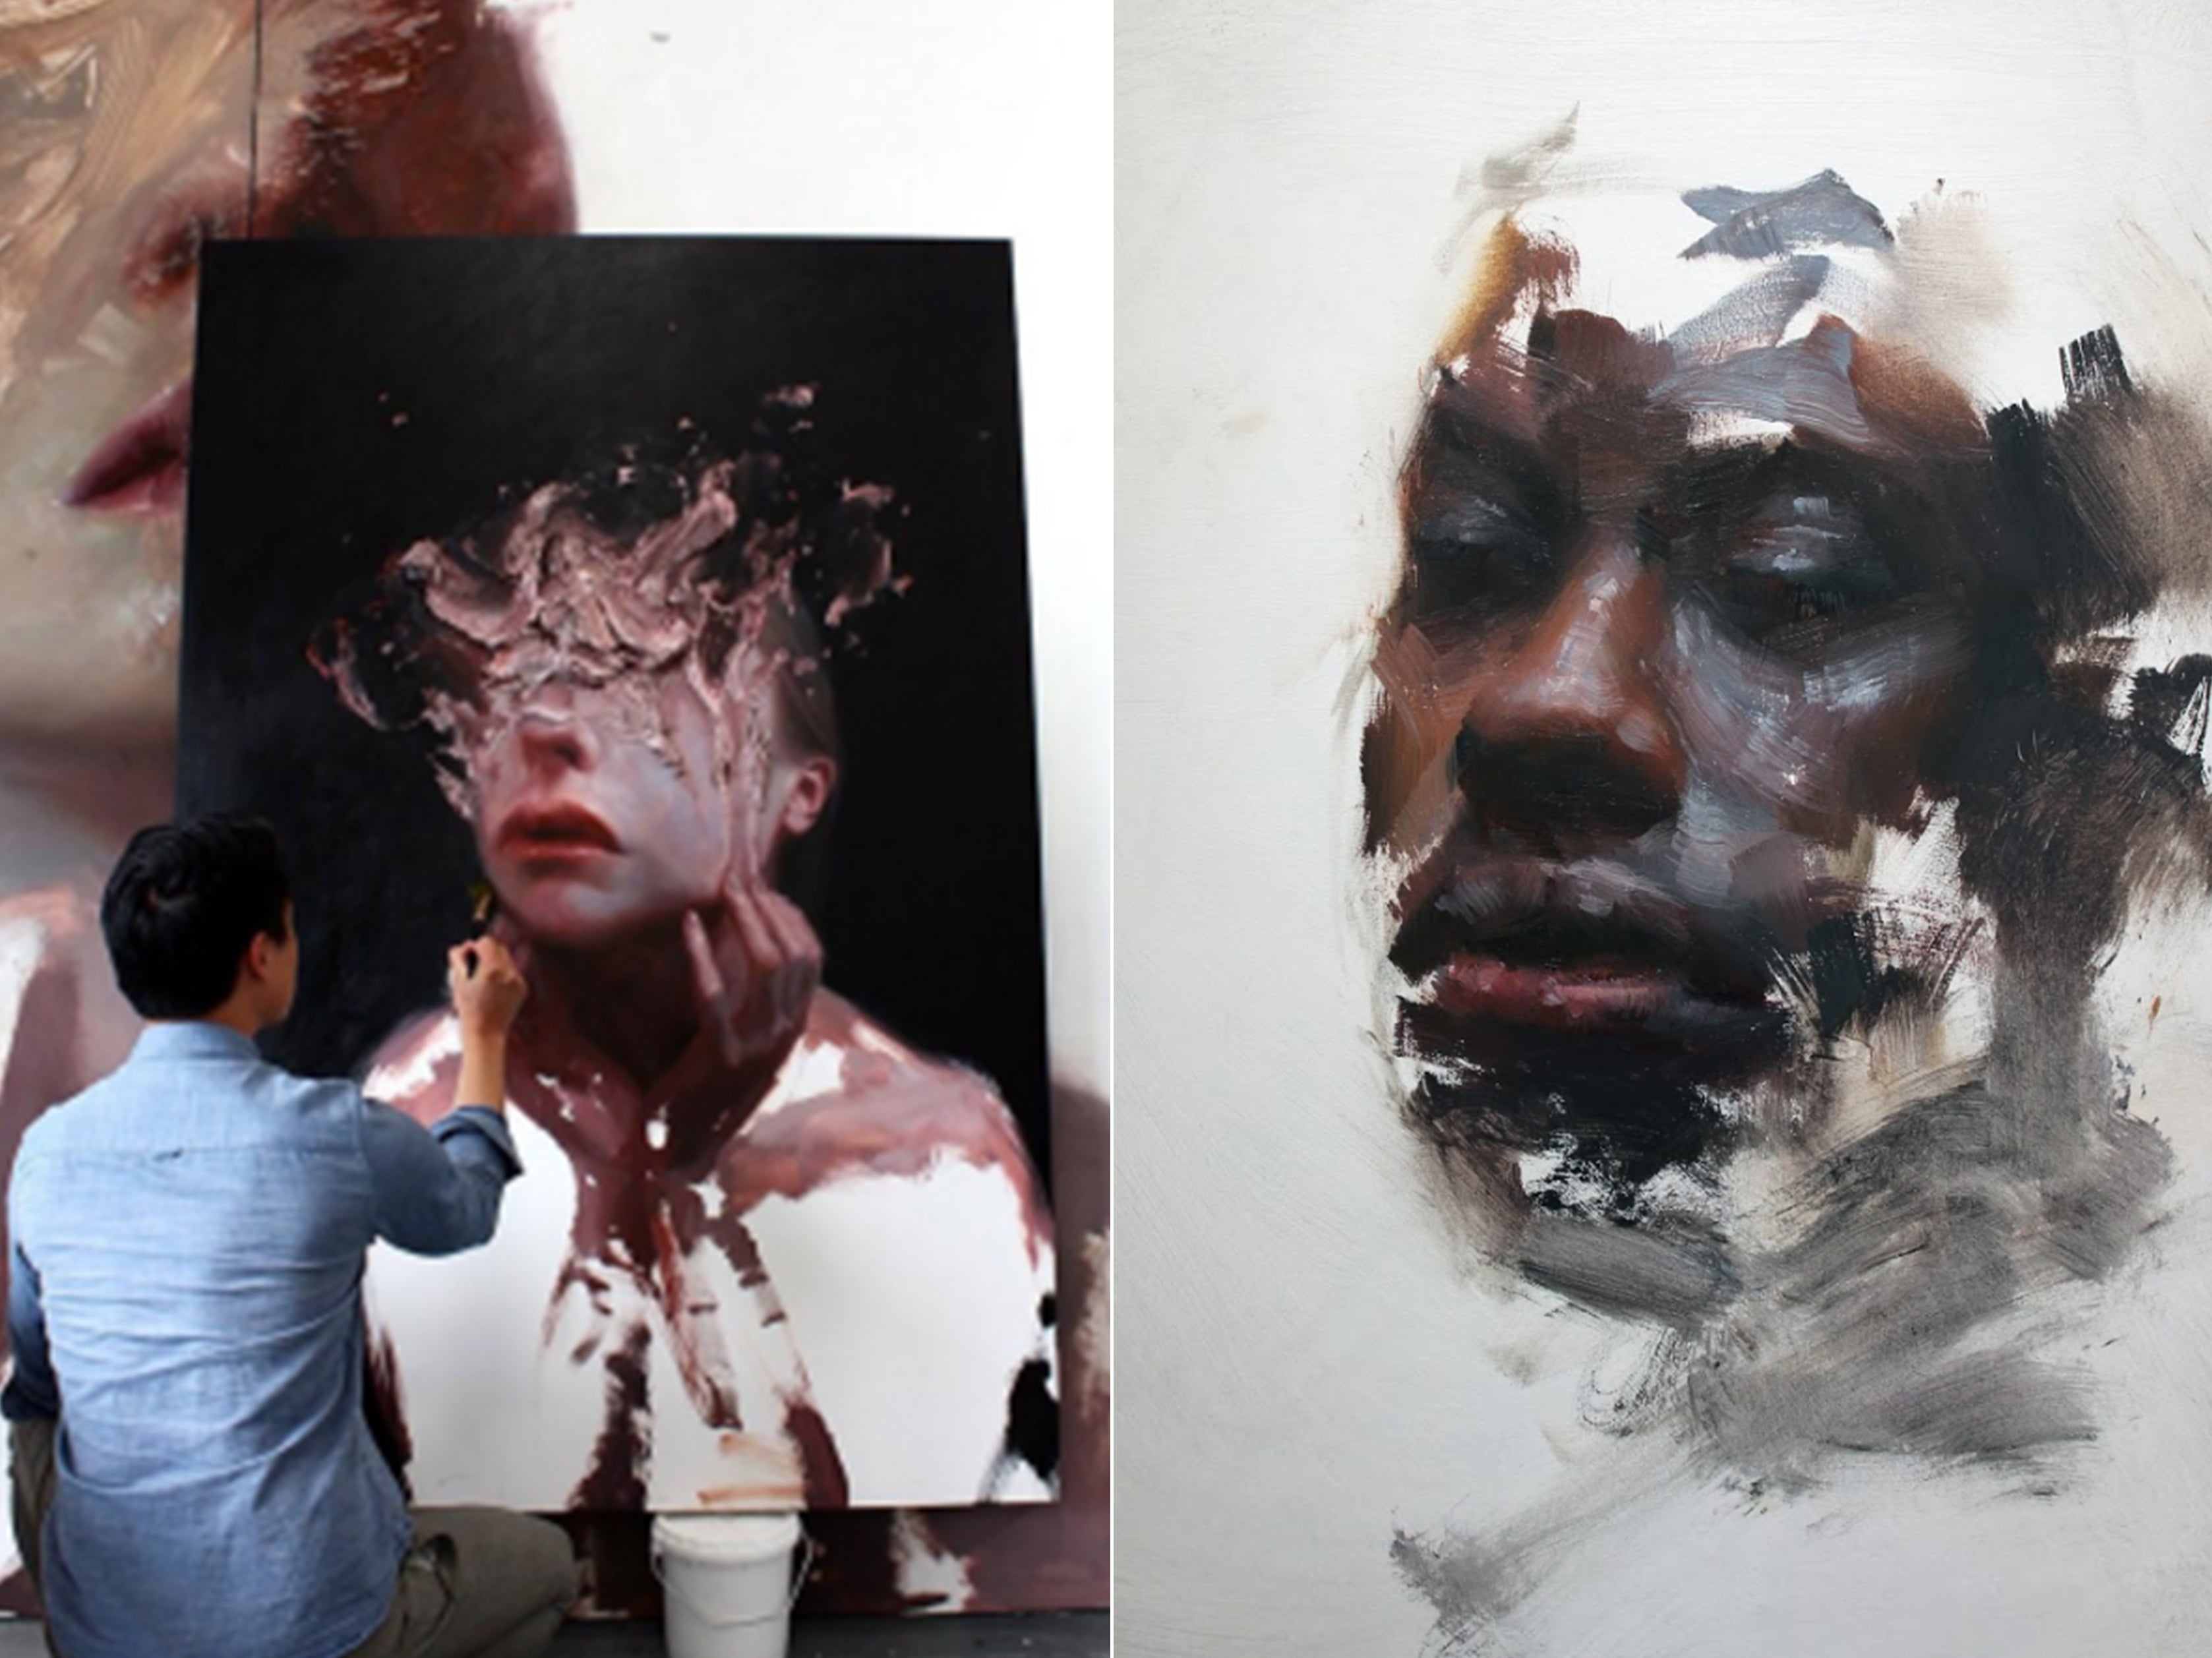 Uldalen’s work has been praised for his use of contemporary surrealist techniques in portraiture